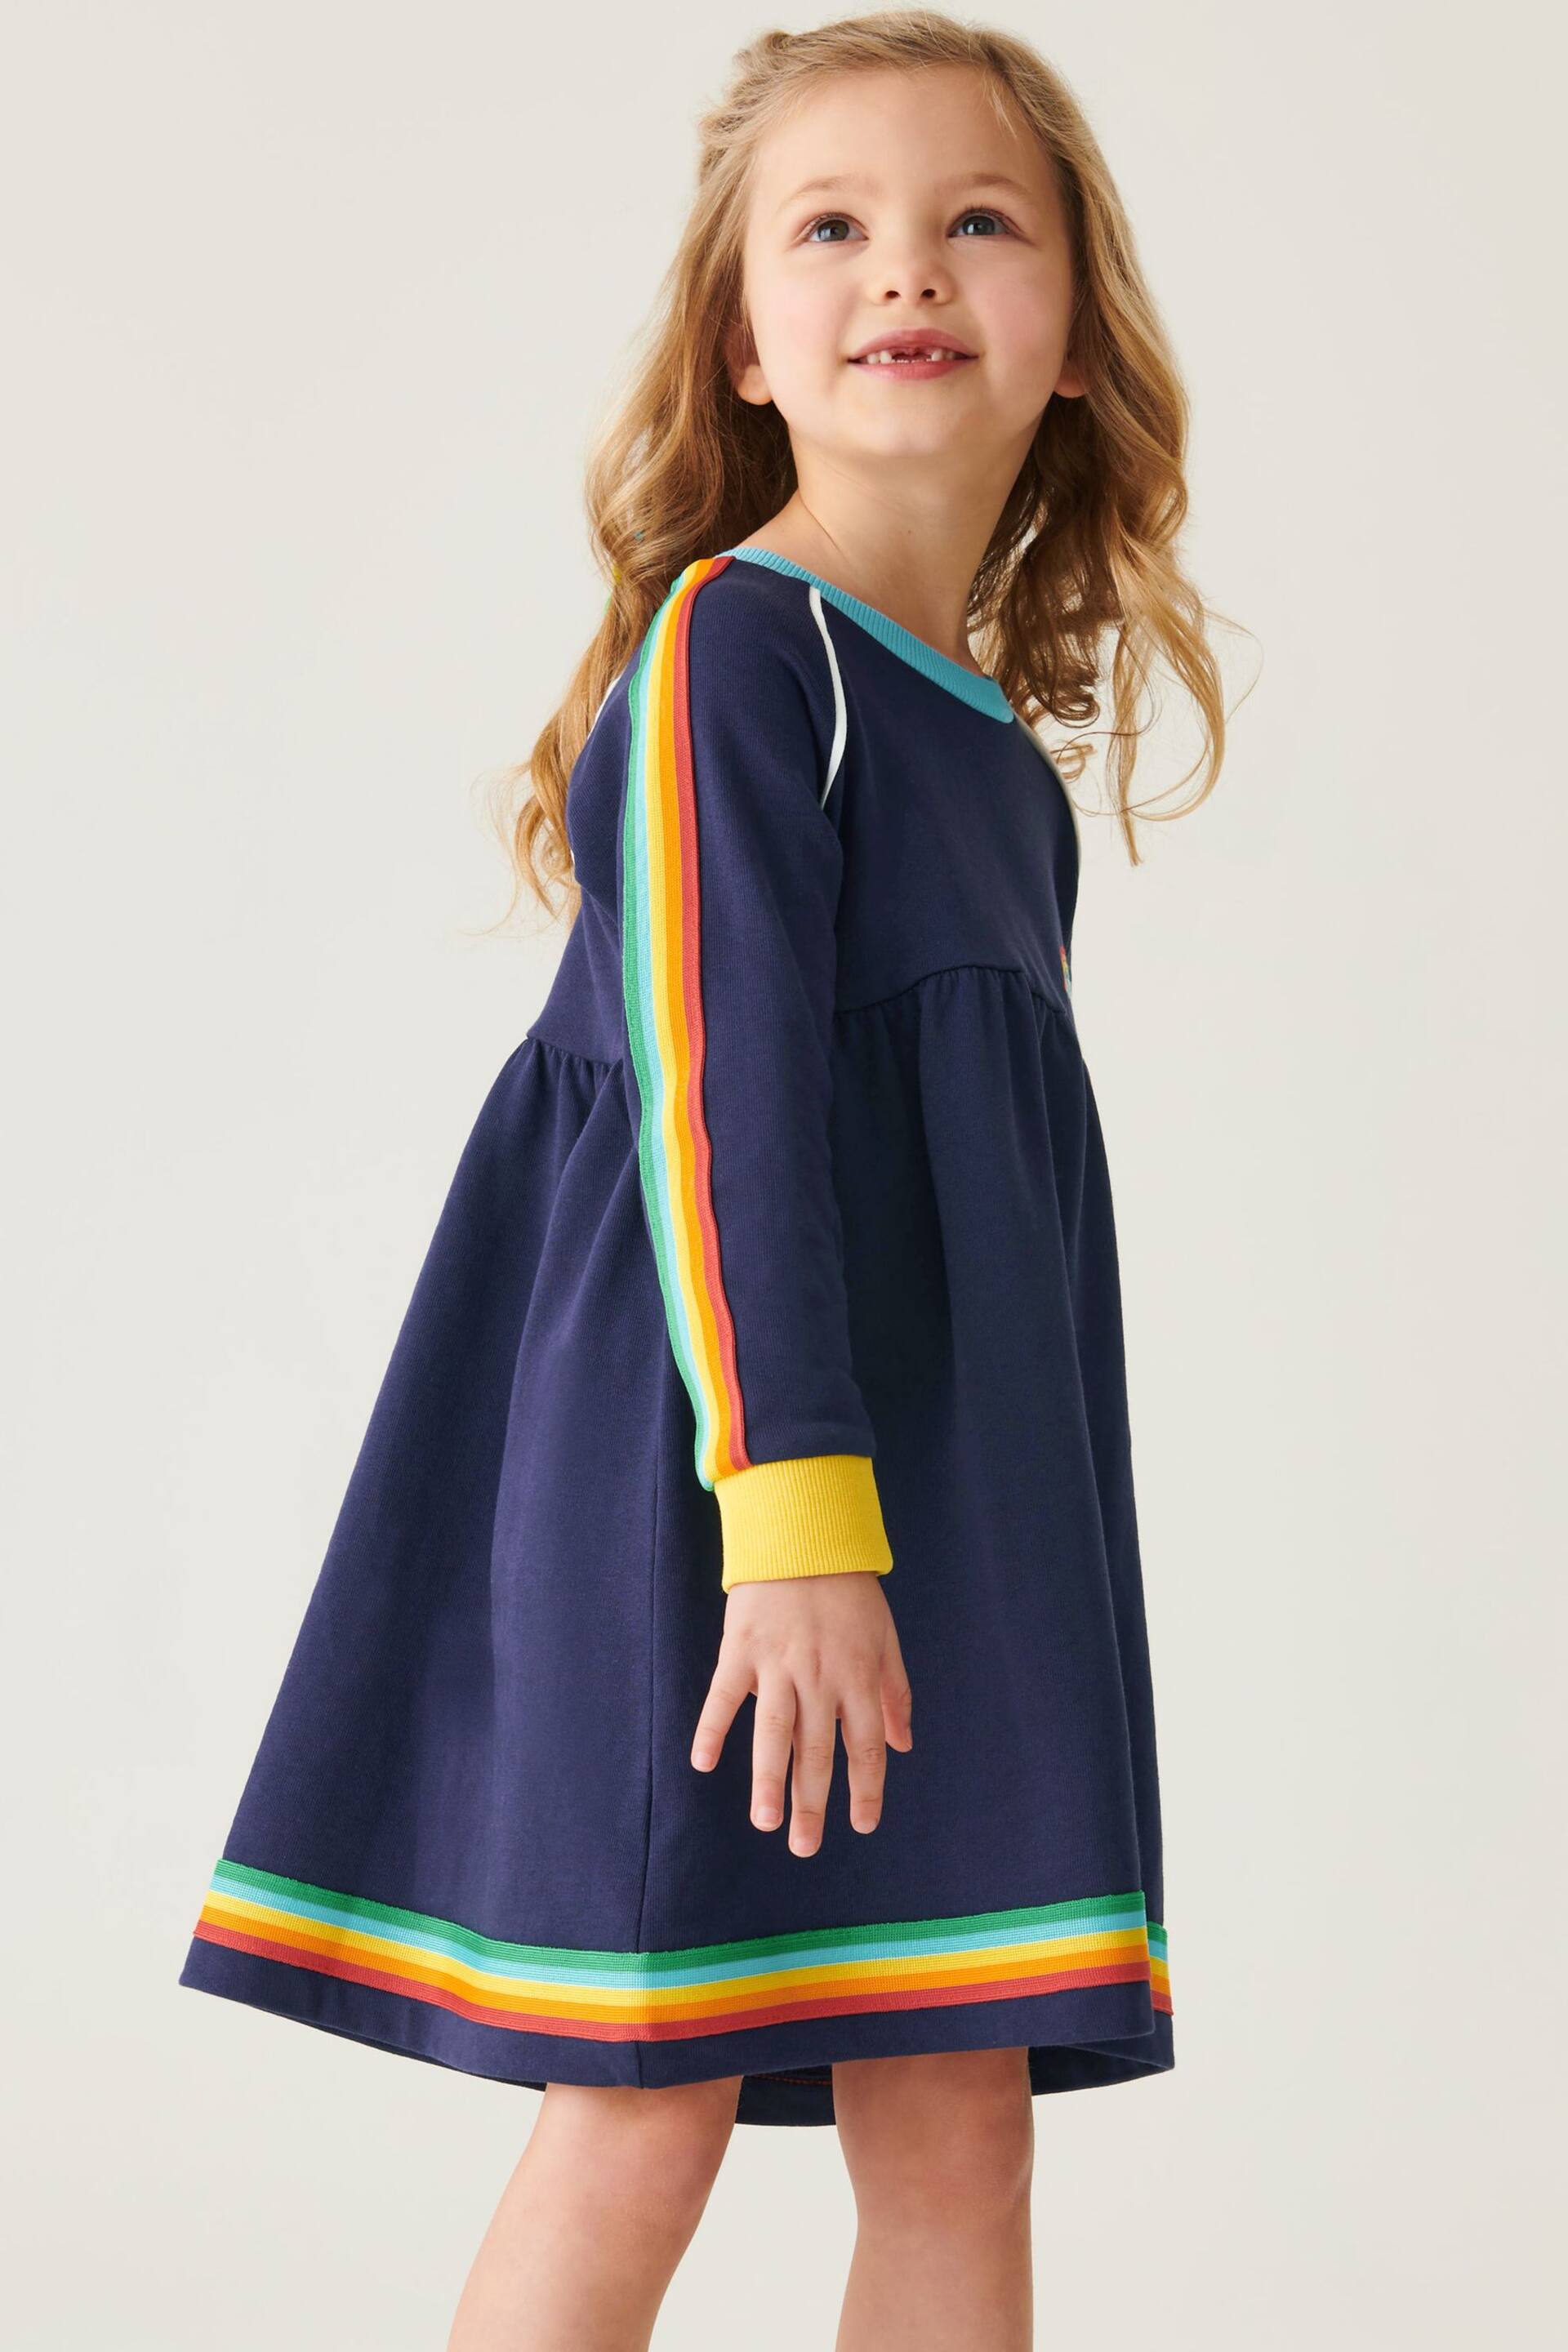 Little Bird by Jools Oliver Navy Little Bird by Jools Oliver Long Sleeve Rainbow Dress - Image 2 of 8